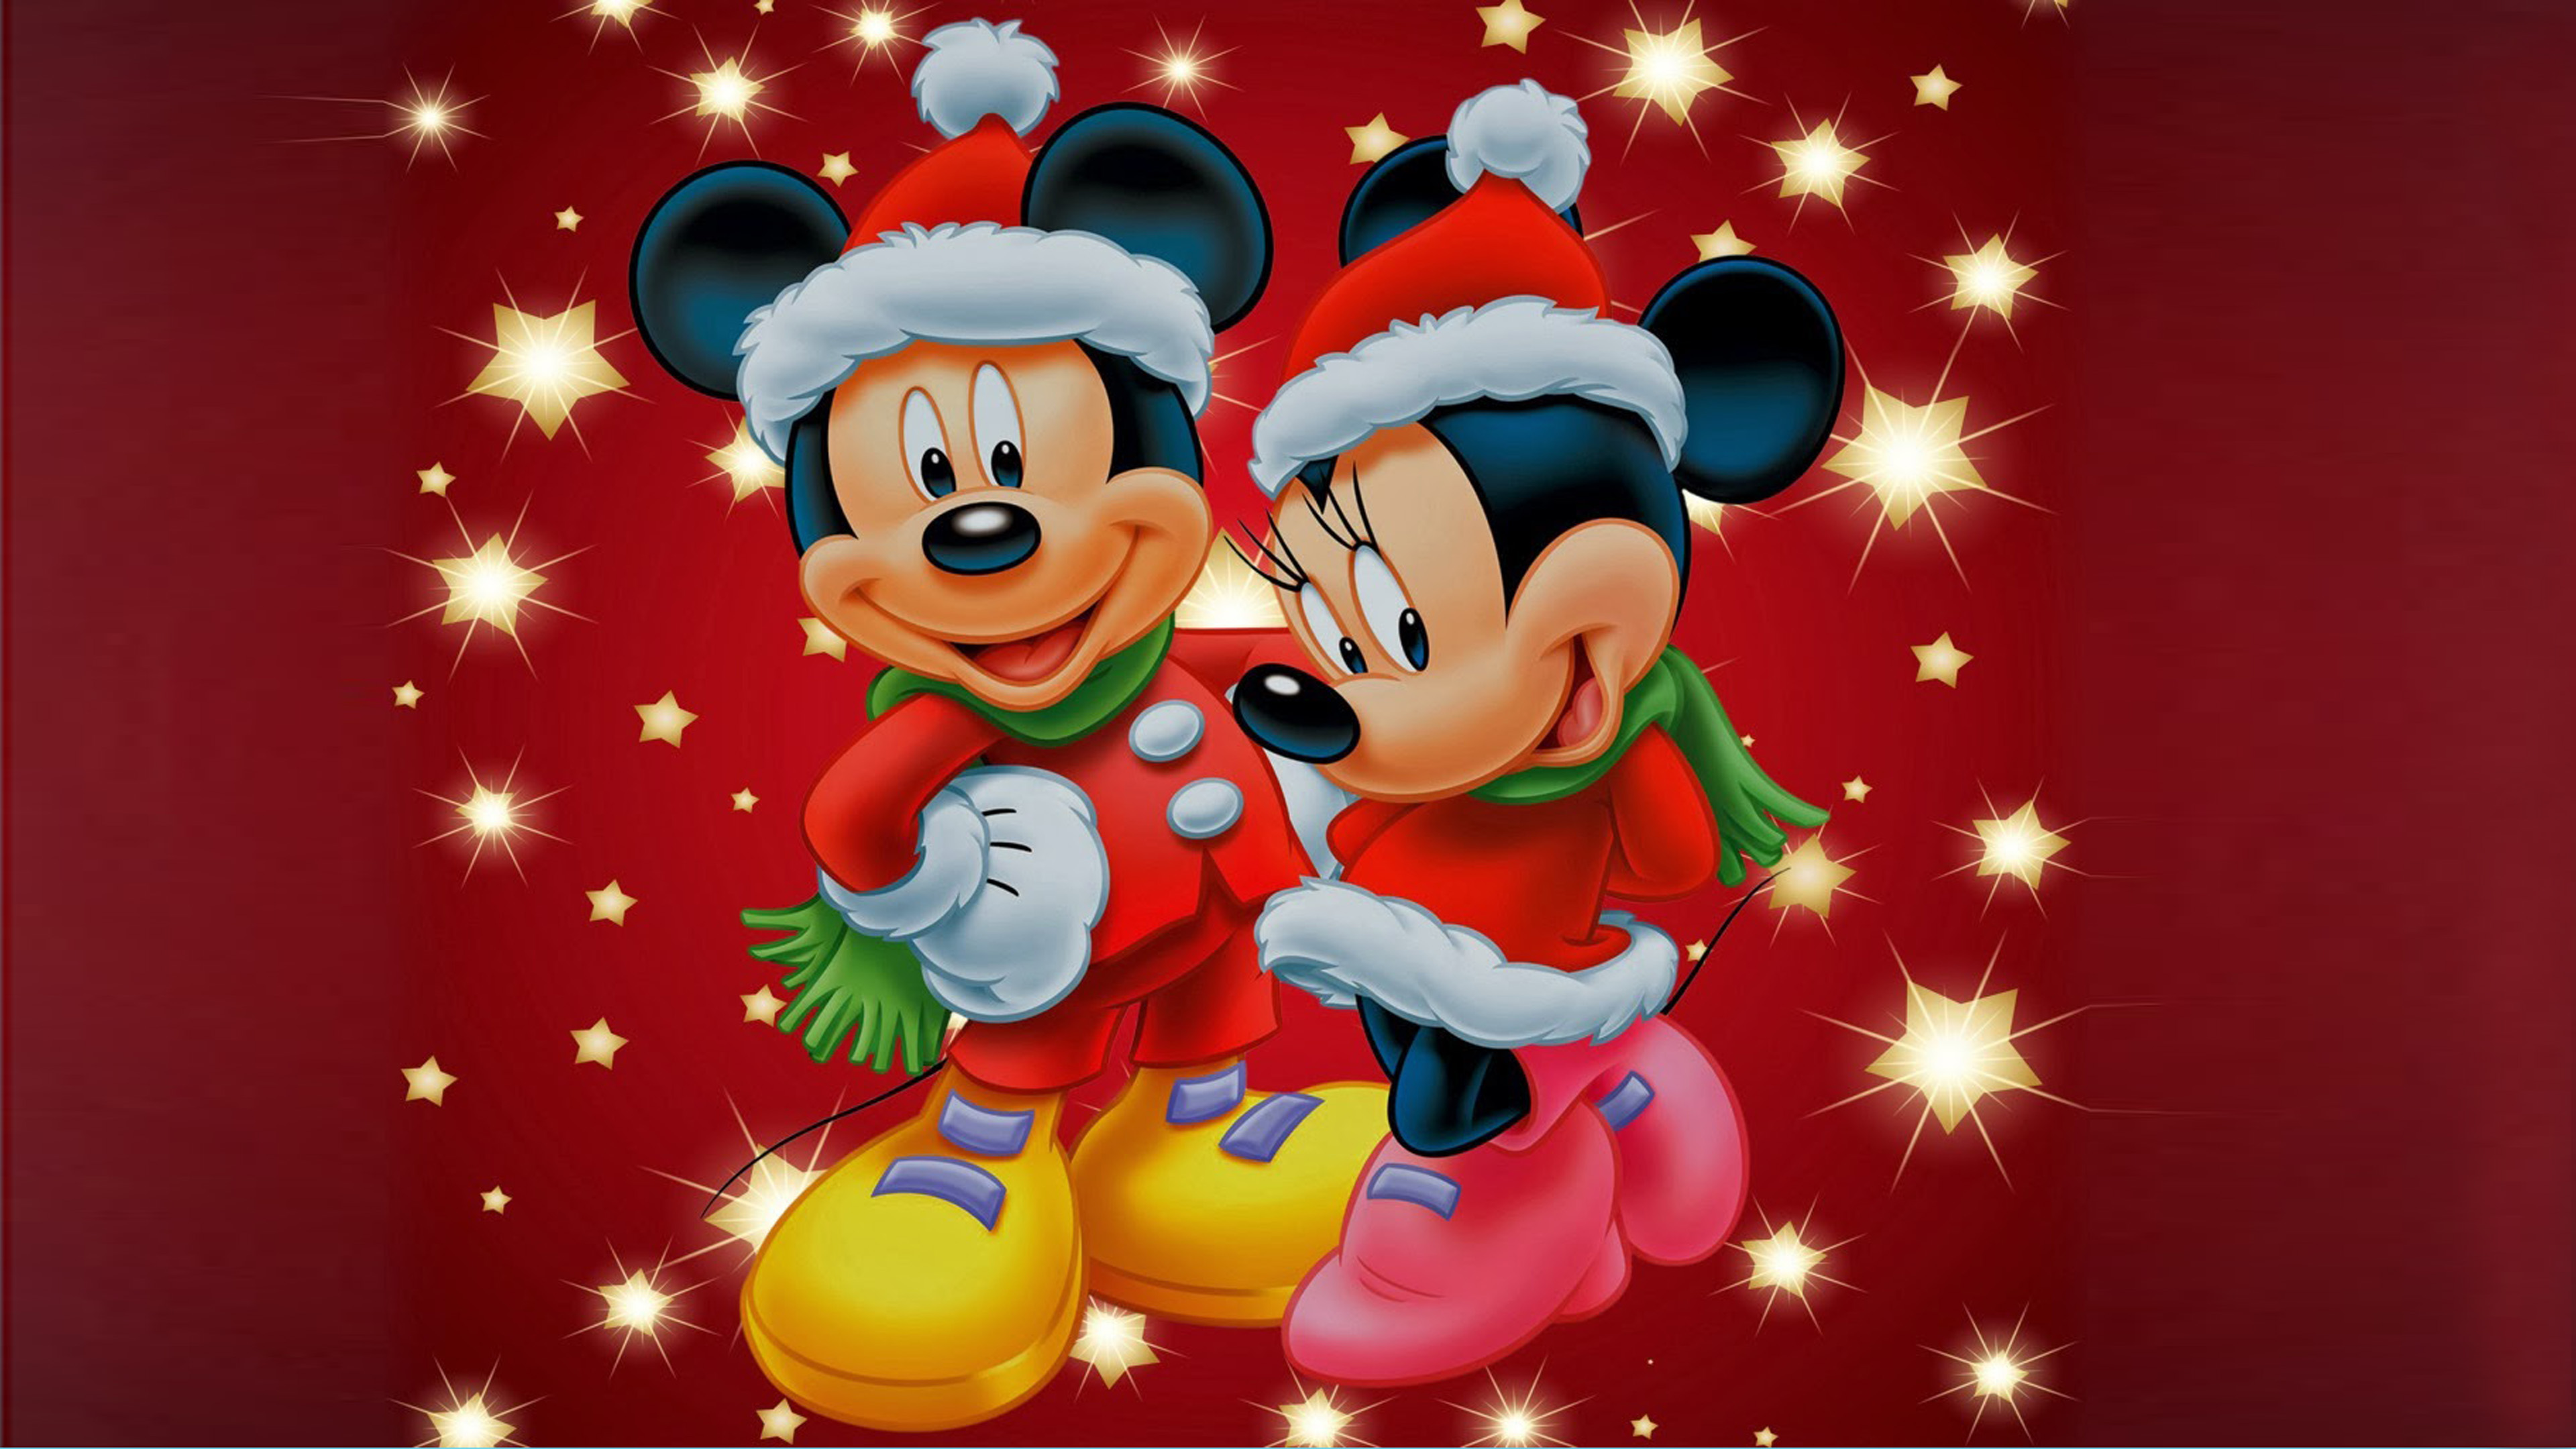 Mickey And Minnie Mouse Christmas Theme Desktop Wallpaper Hd For Mobile  Phones And Laptops 3840x2160 : 